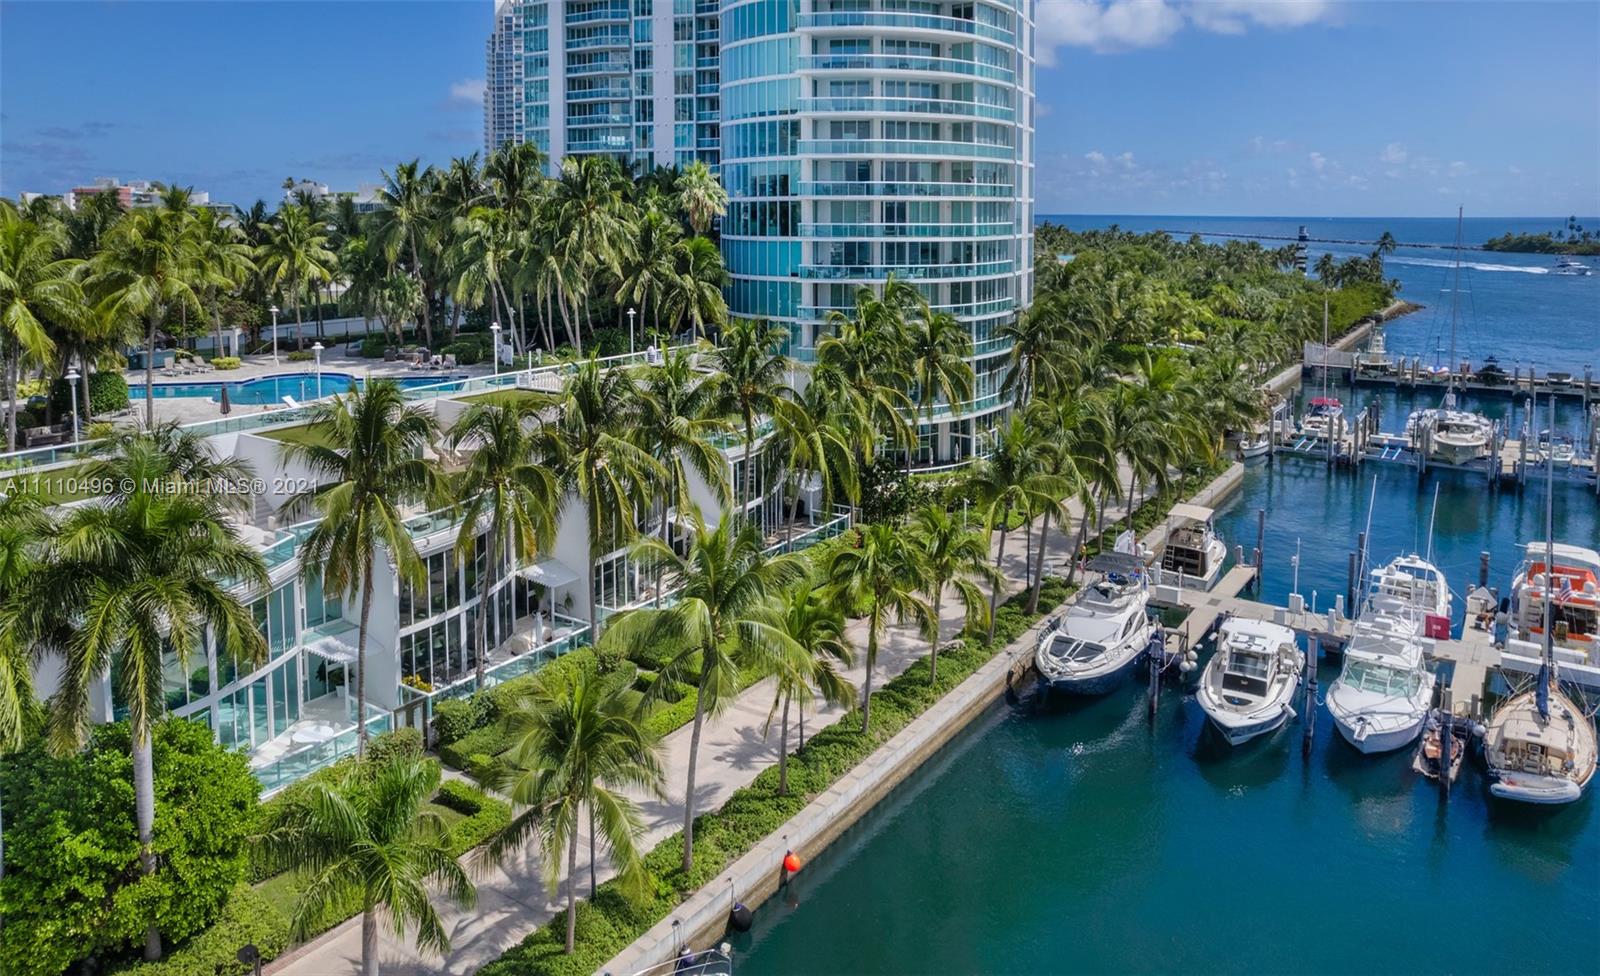 Own this unique Waterfront townhome located South of Fifth, Miami Beach's most prestigious residential address. A 3 BR/4.5 BA marina townhouse that lives like a home, with the easy maintenance & amenities of a condo. Dramatic 20-ft ceiling entry, gorgeous water views, private 2 car attached garage & tons of storage. A few steps to the Miami Beach Marina, Dock your boat right outside your front door! ENTERTAIN IN STYLE on 1,500 SF of sun-drenched & rooftop terraces. Swimmers, walk up your personal stairs to Murano’s lap pool. Dog Owners, enjoy easy access to your front yard. Take in Marina Life, Downtown Views & Stunning Sunsets. Live steps from the beach & 17-acre South Pointe Park. Walk to 15+ world-class restaurants including Carbone, Milos & Prime. This waterfront townhouse has it all!